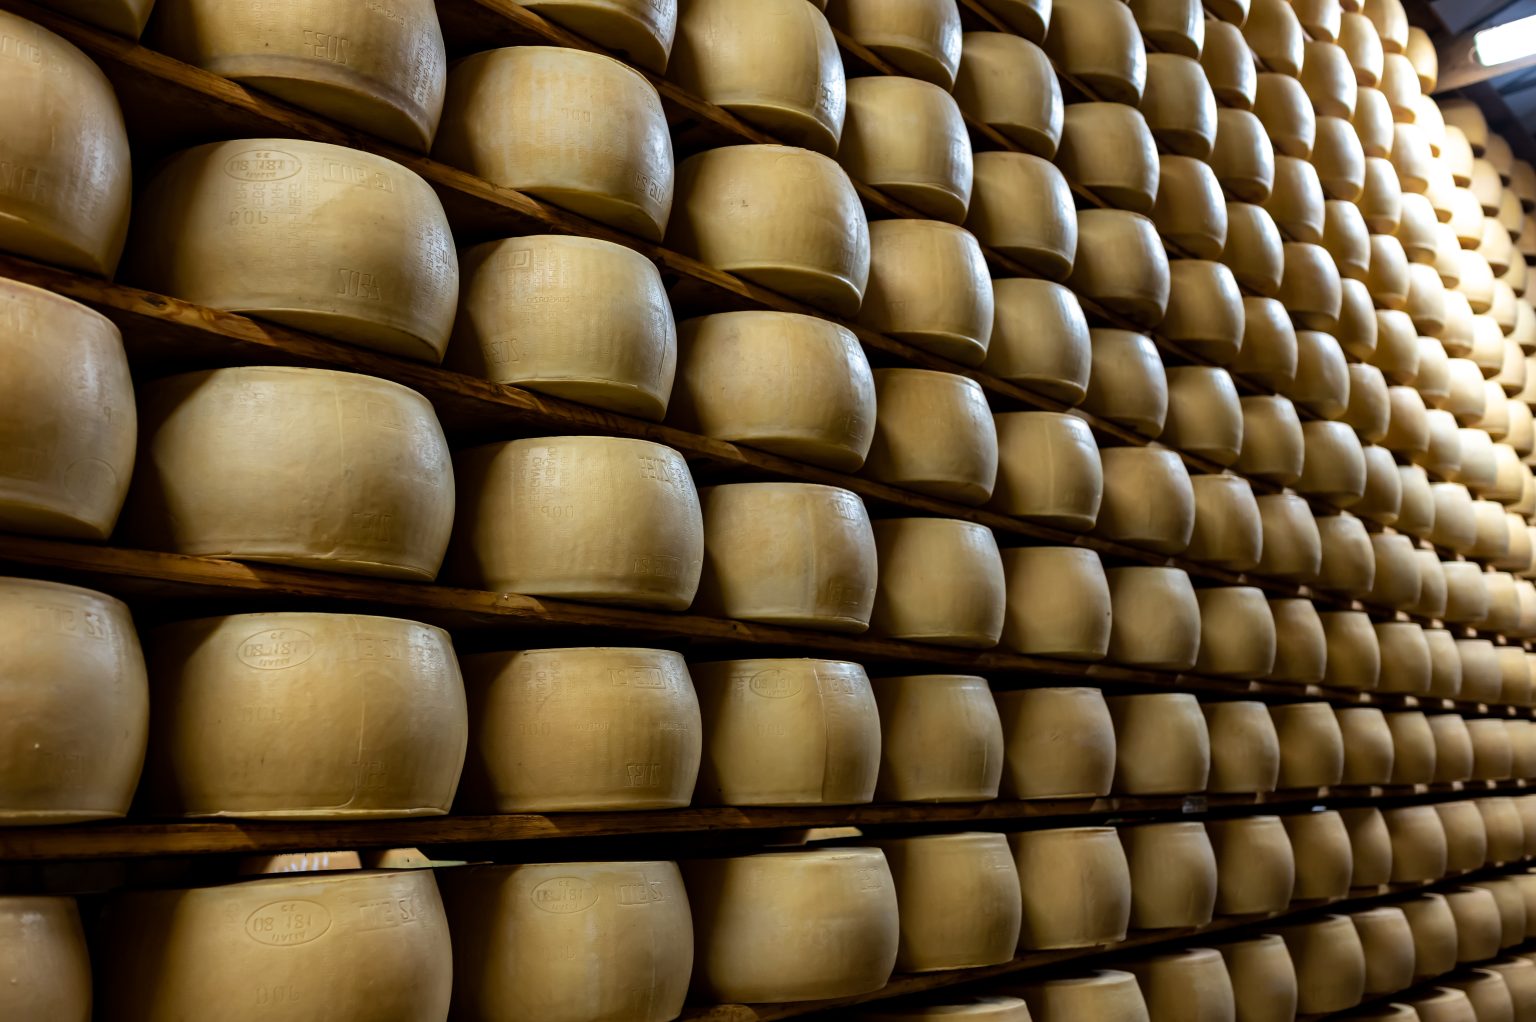 Parmigiano Reggiano launches three-year EU co-funded campaign